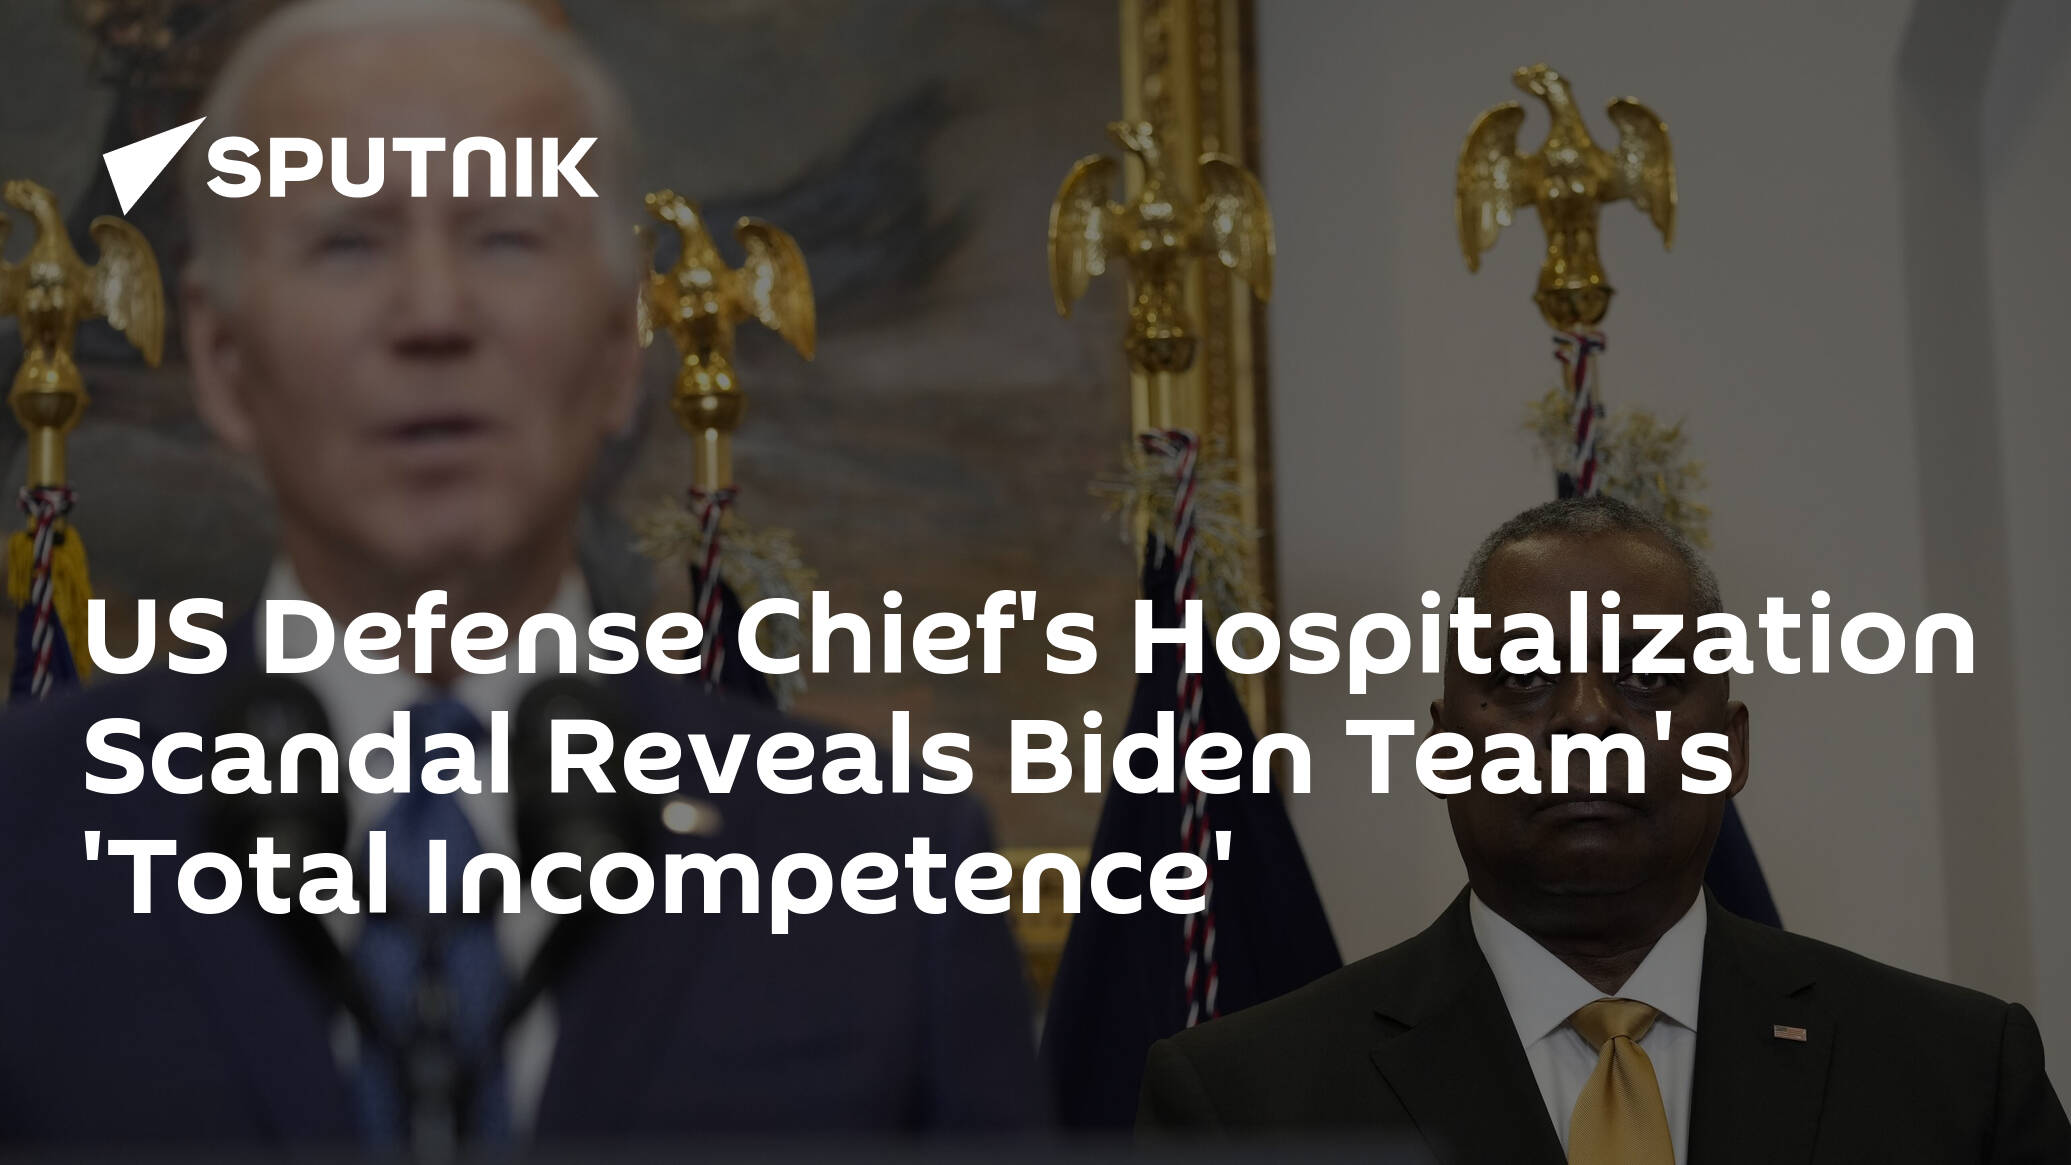 US Defense Chief's Hospitalization Scandal Reveals Biden Team's 'Total Incompetence'